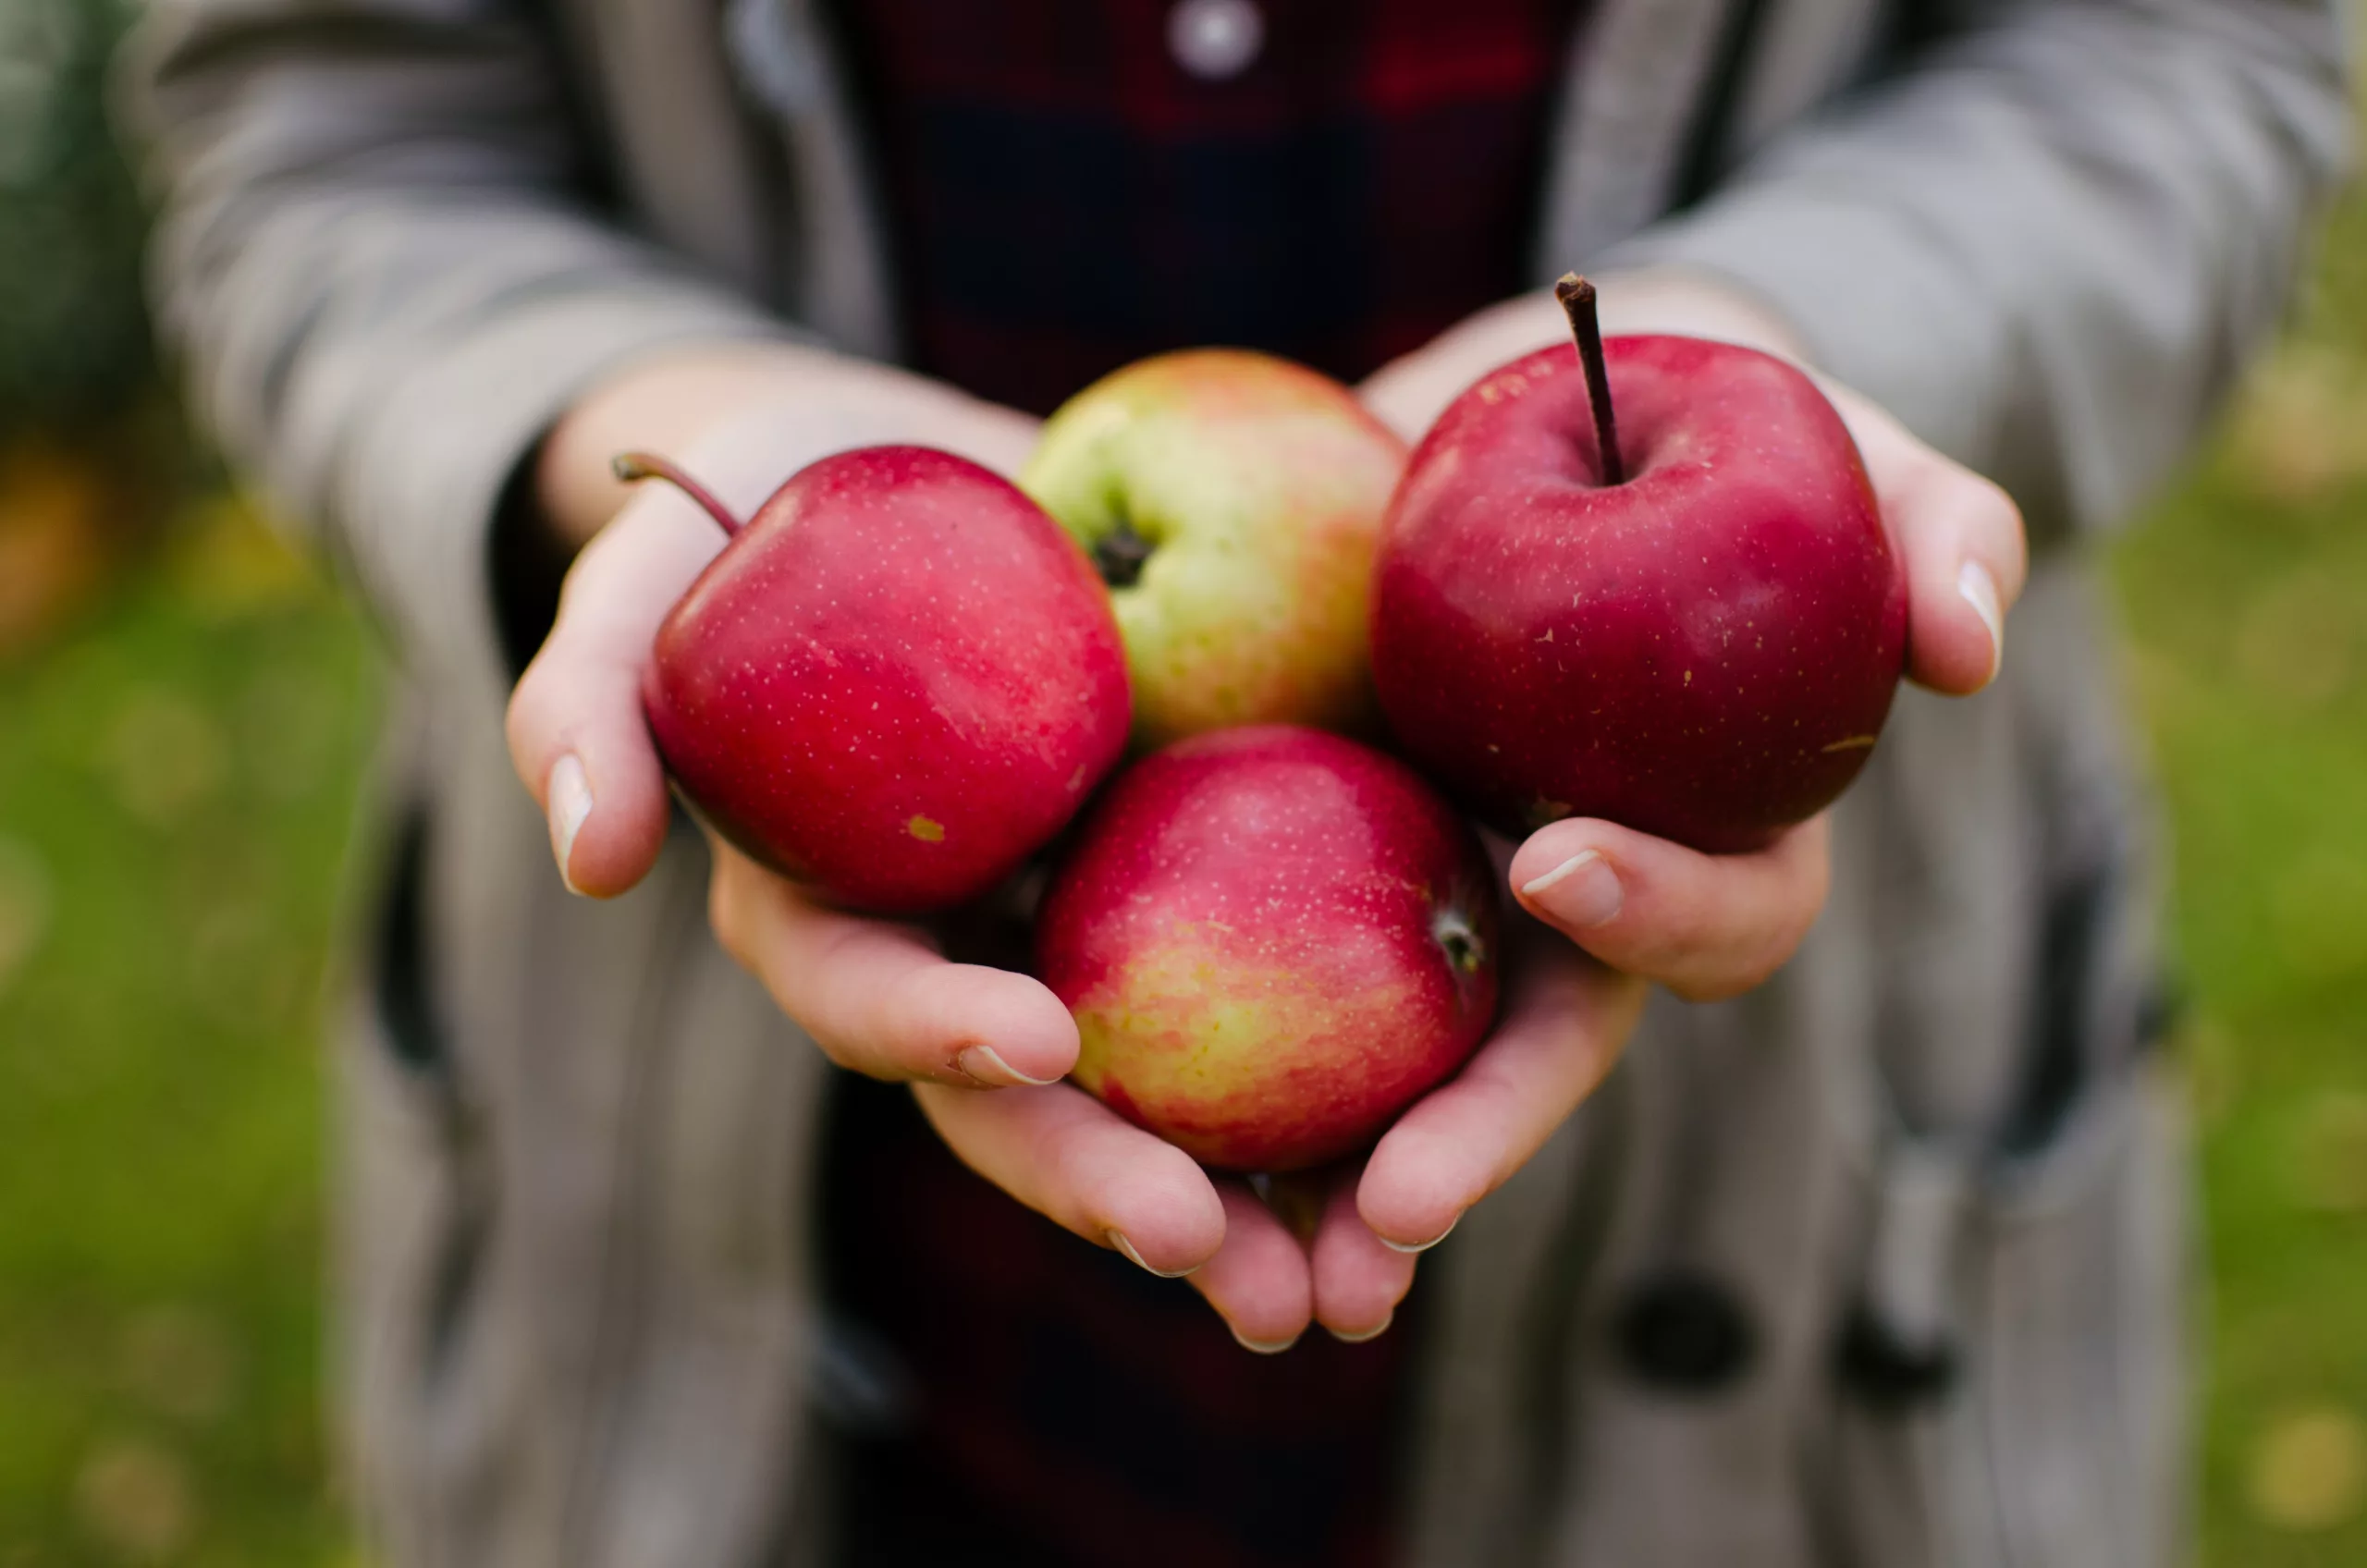 Apples are a great source of fibre. There are many health benefits of fibre.